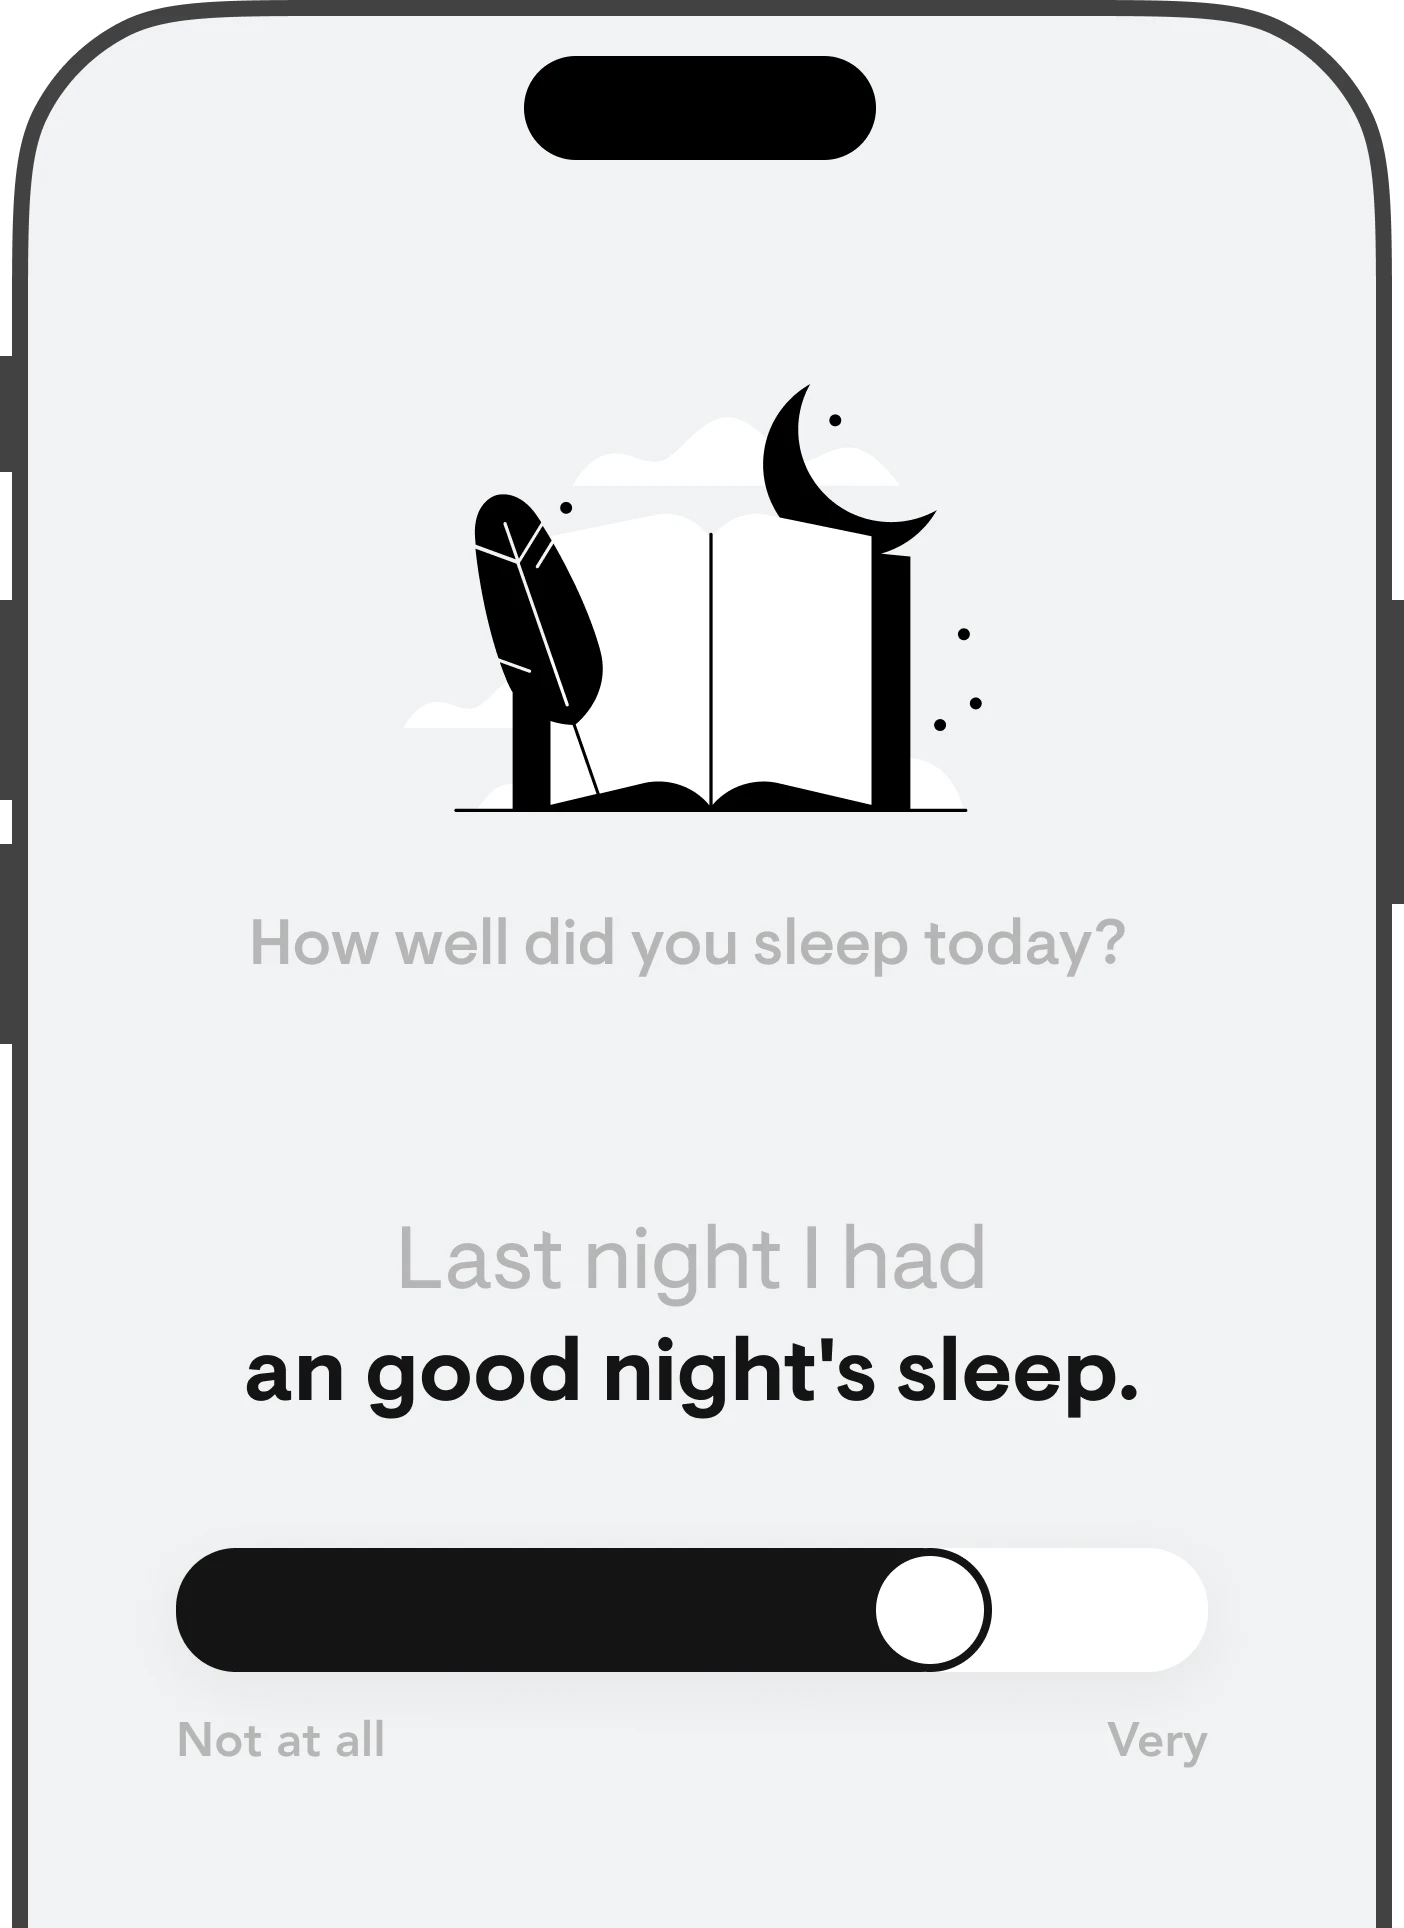 A screenshot from the stoic mental health app where you are being asked about the quality of sleep which is a part of their sleep tracking and mood tracker features.